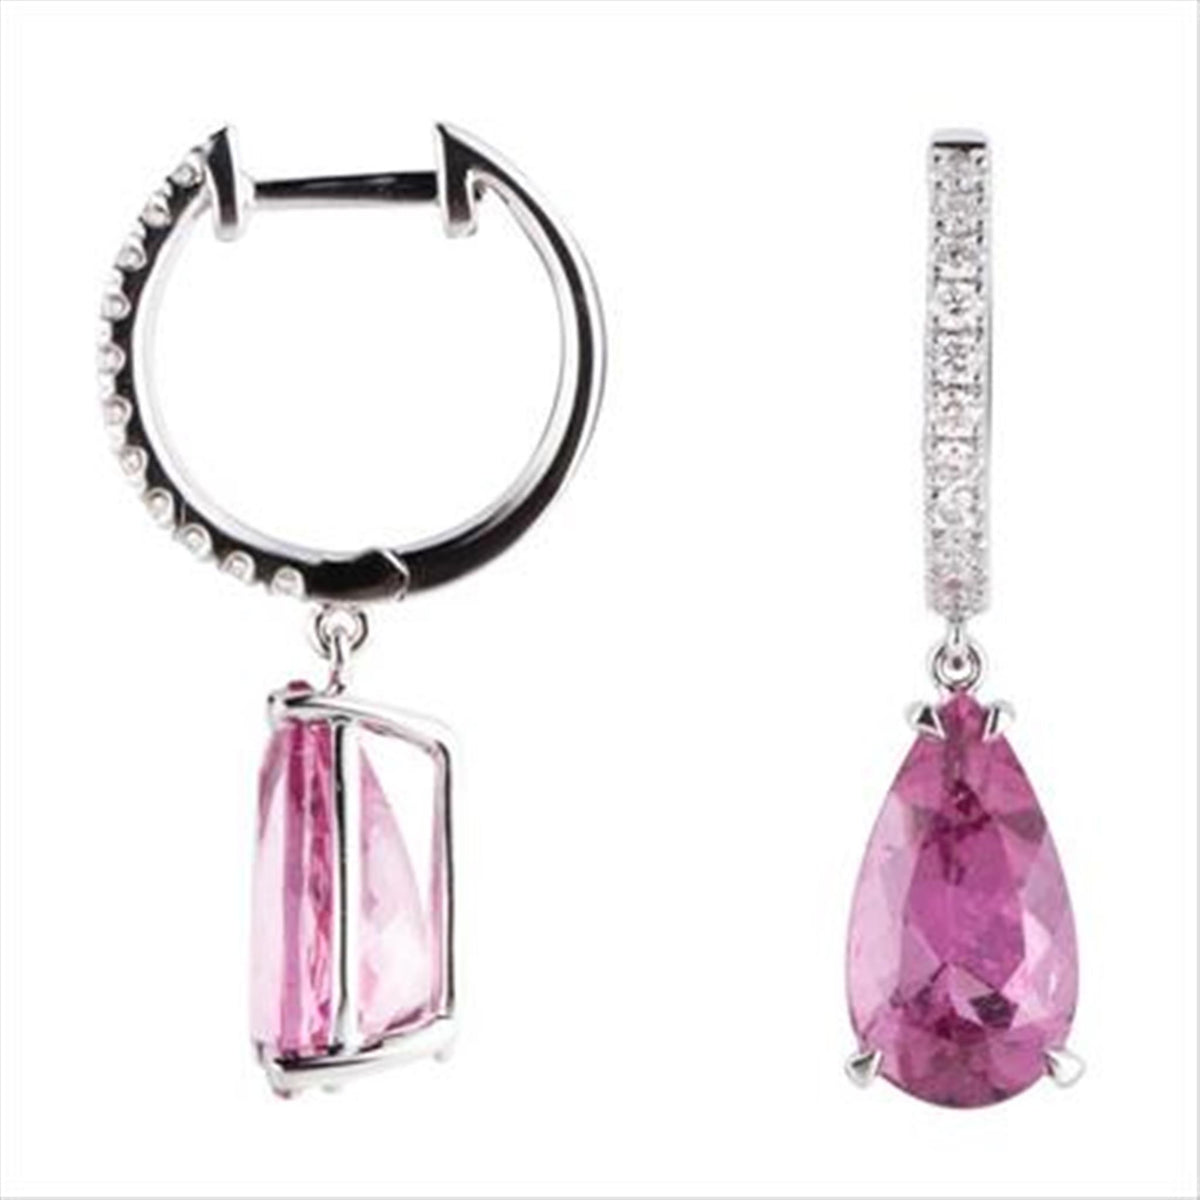 18Kt White Gold Round Hoop Diamond and Pink Tourmaline Earrings